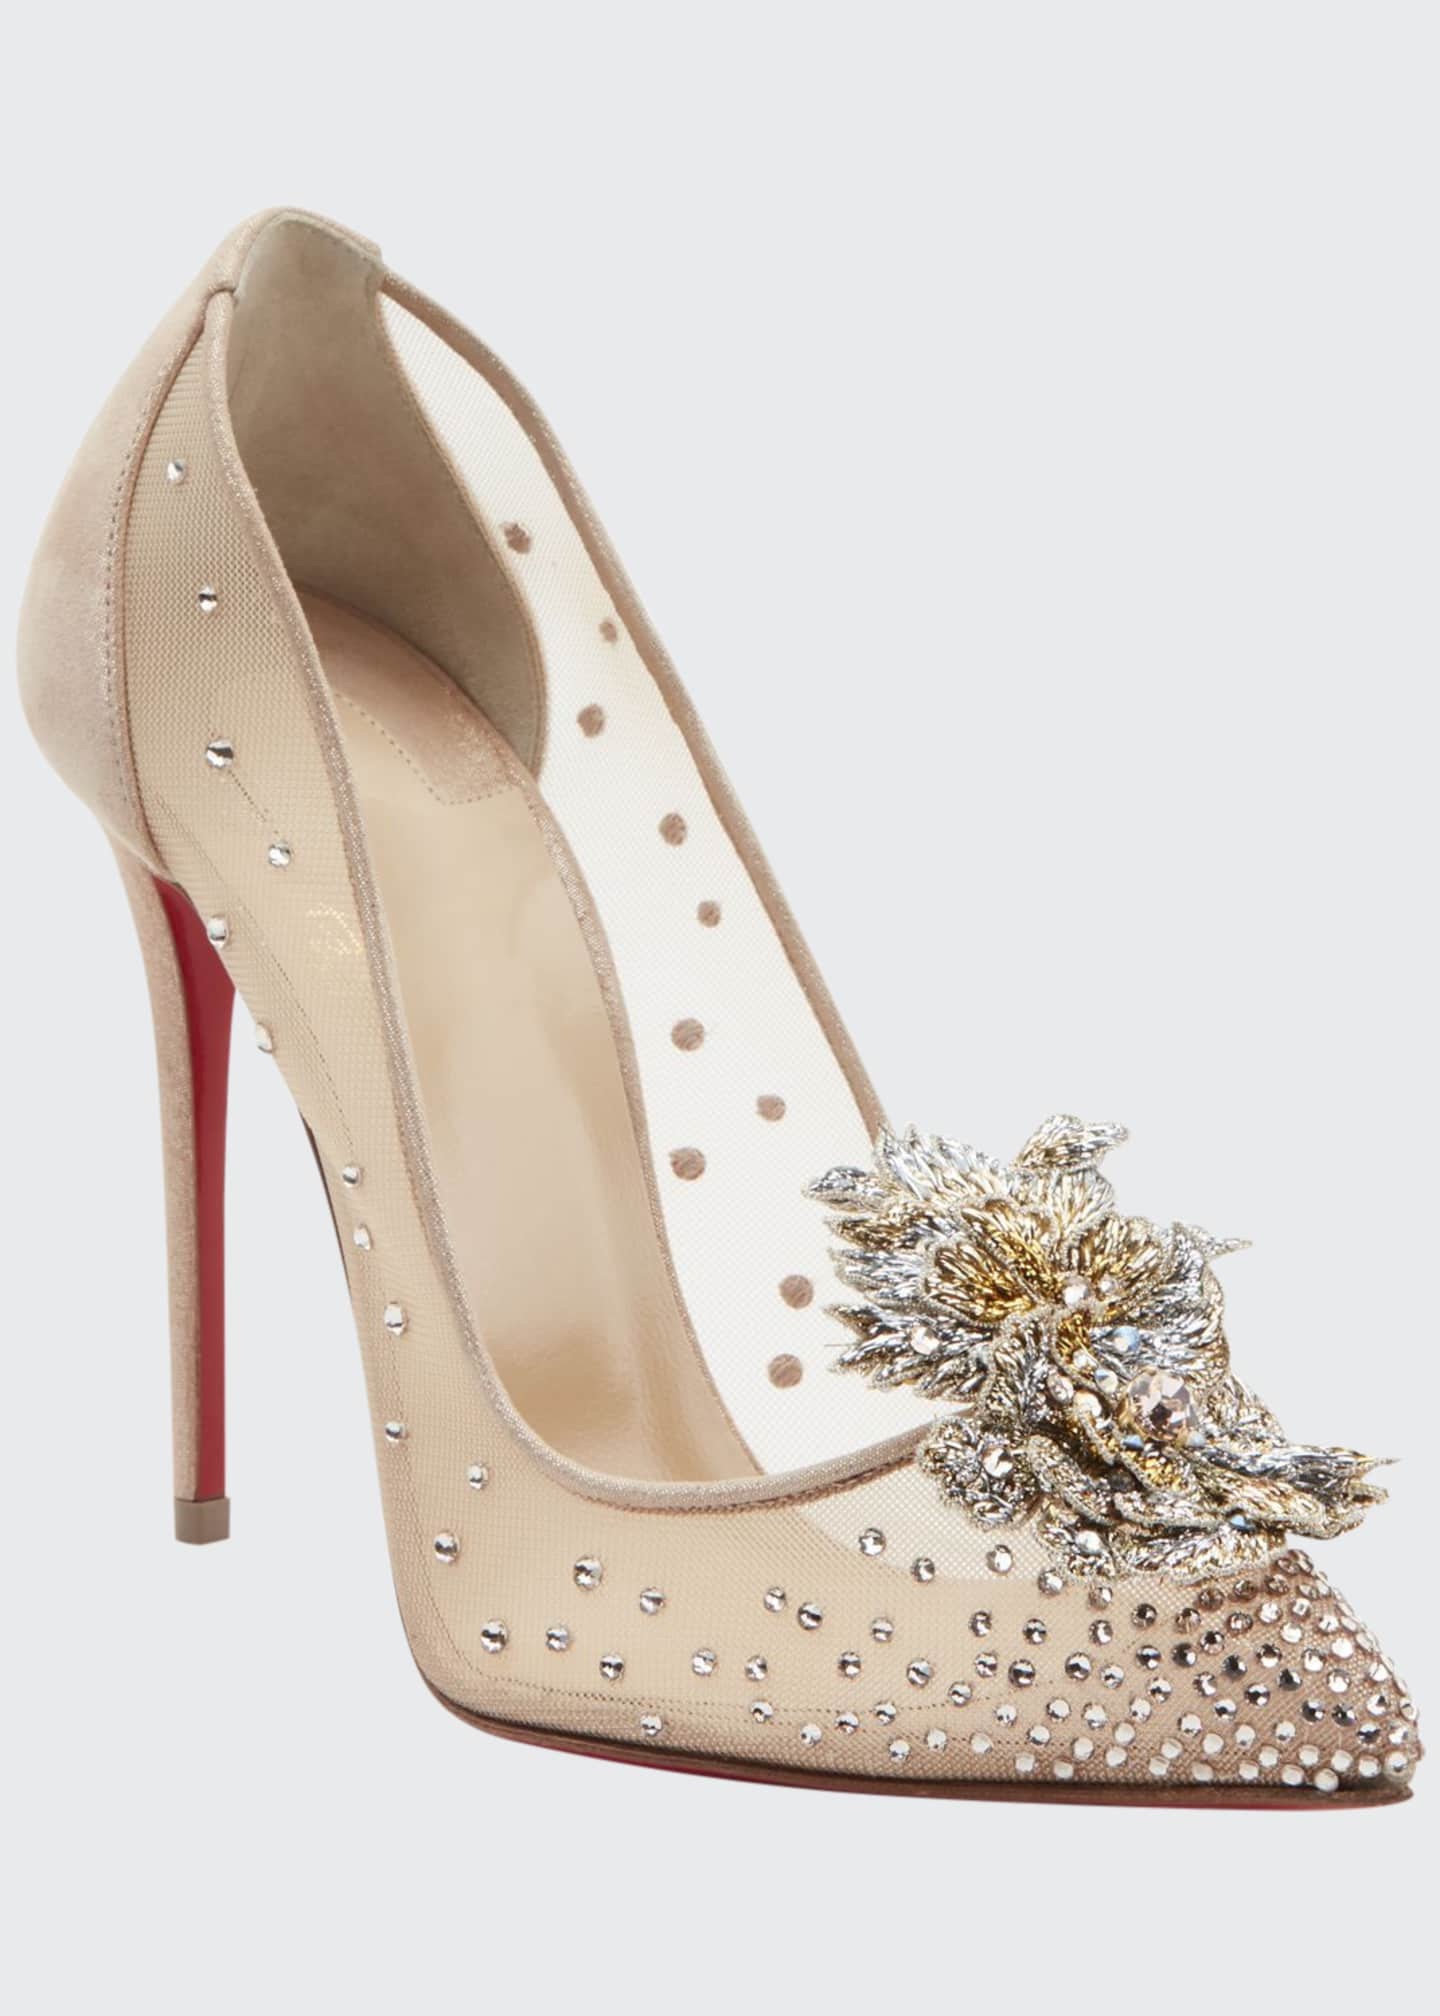 Christian Louboutin Mare Embellished Mesh Red Sole Pumps美炸了